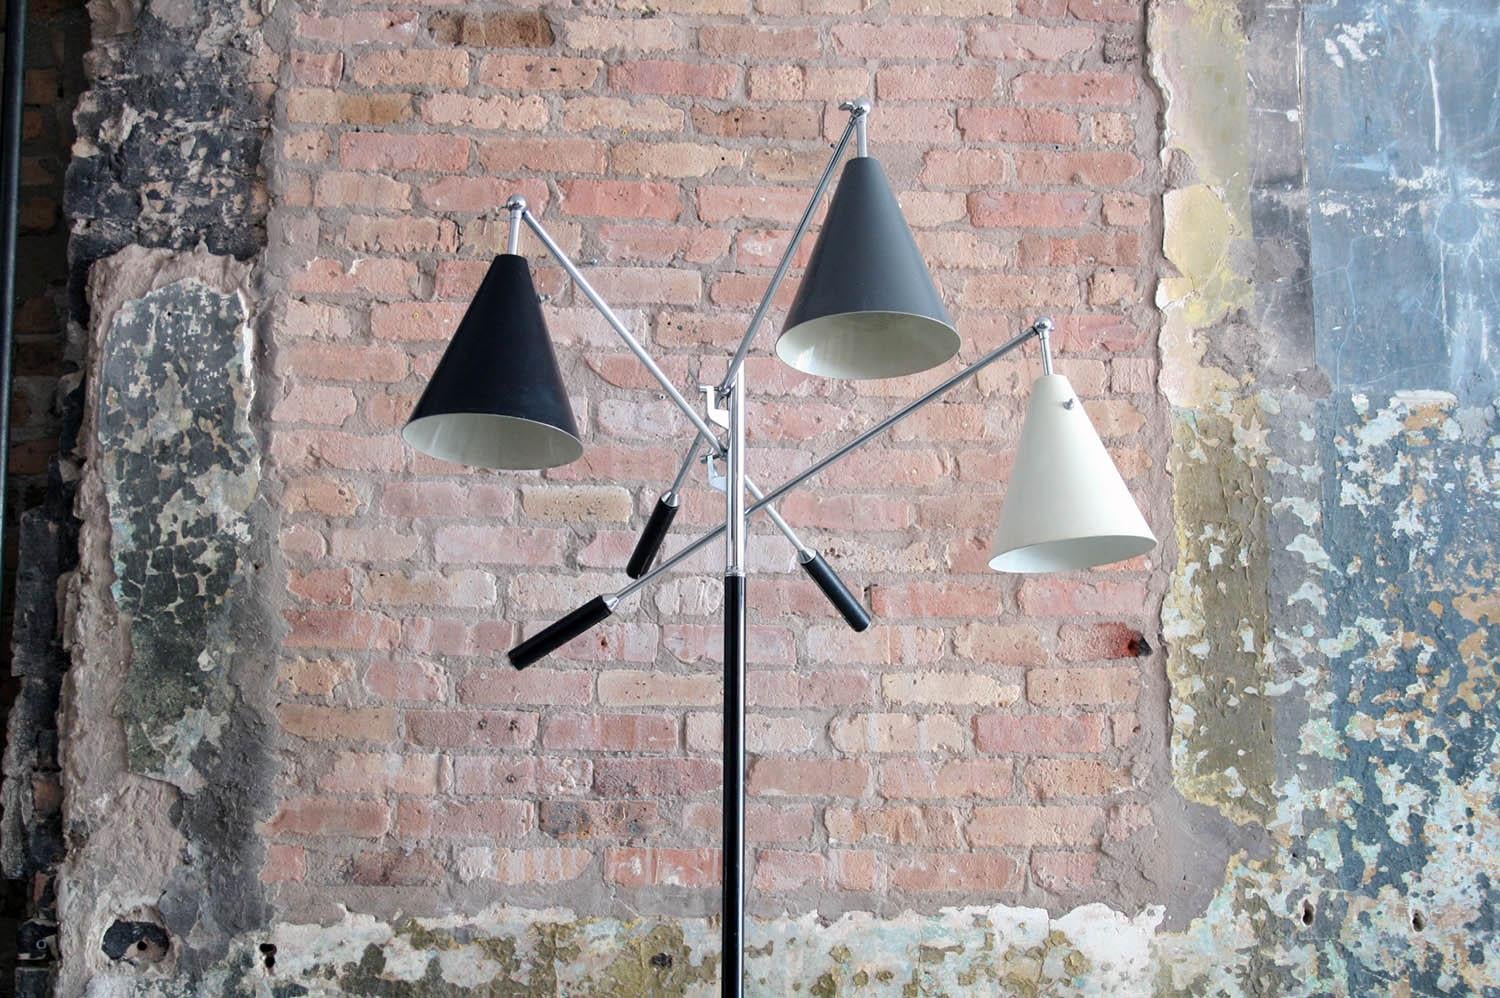 Arredoluce marble base three-arm design from the Milan Triennale of 1951. Features three different colored enameled metal shades in black, grey and white, along with leather handle grips and chrome-plated, articulating arms.

Marked made in